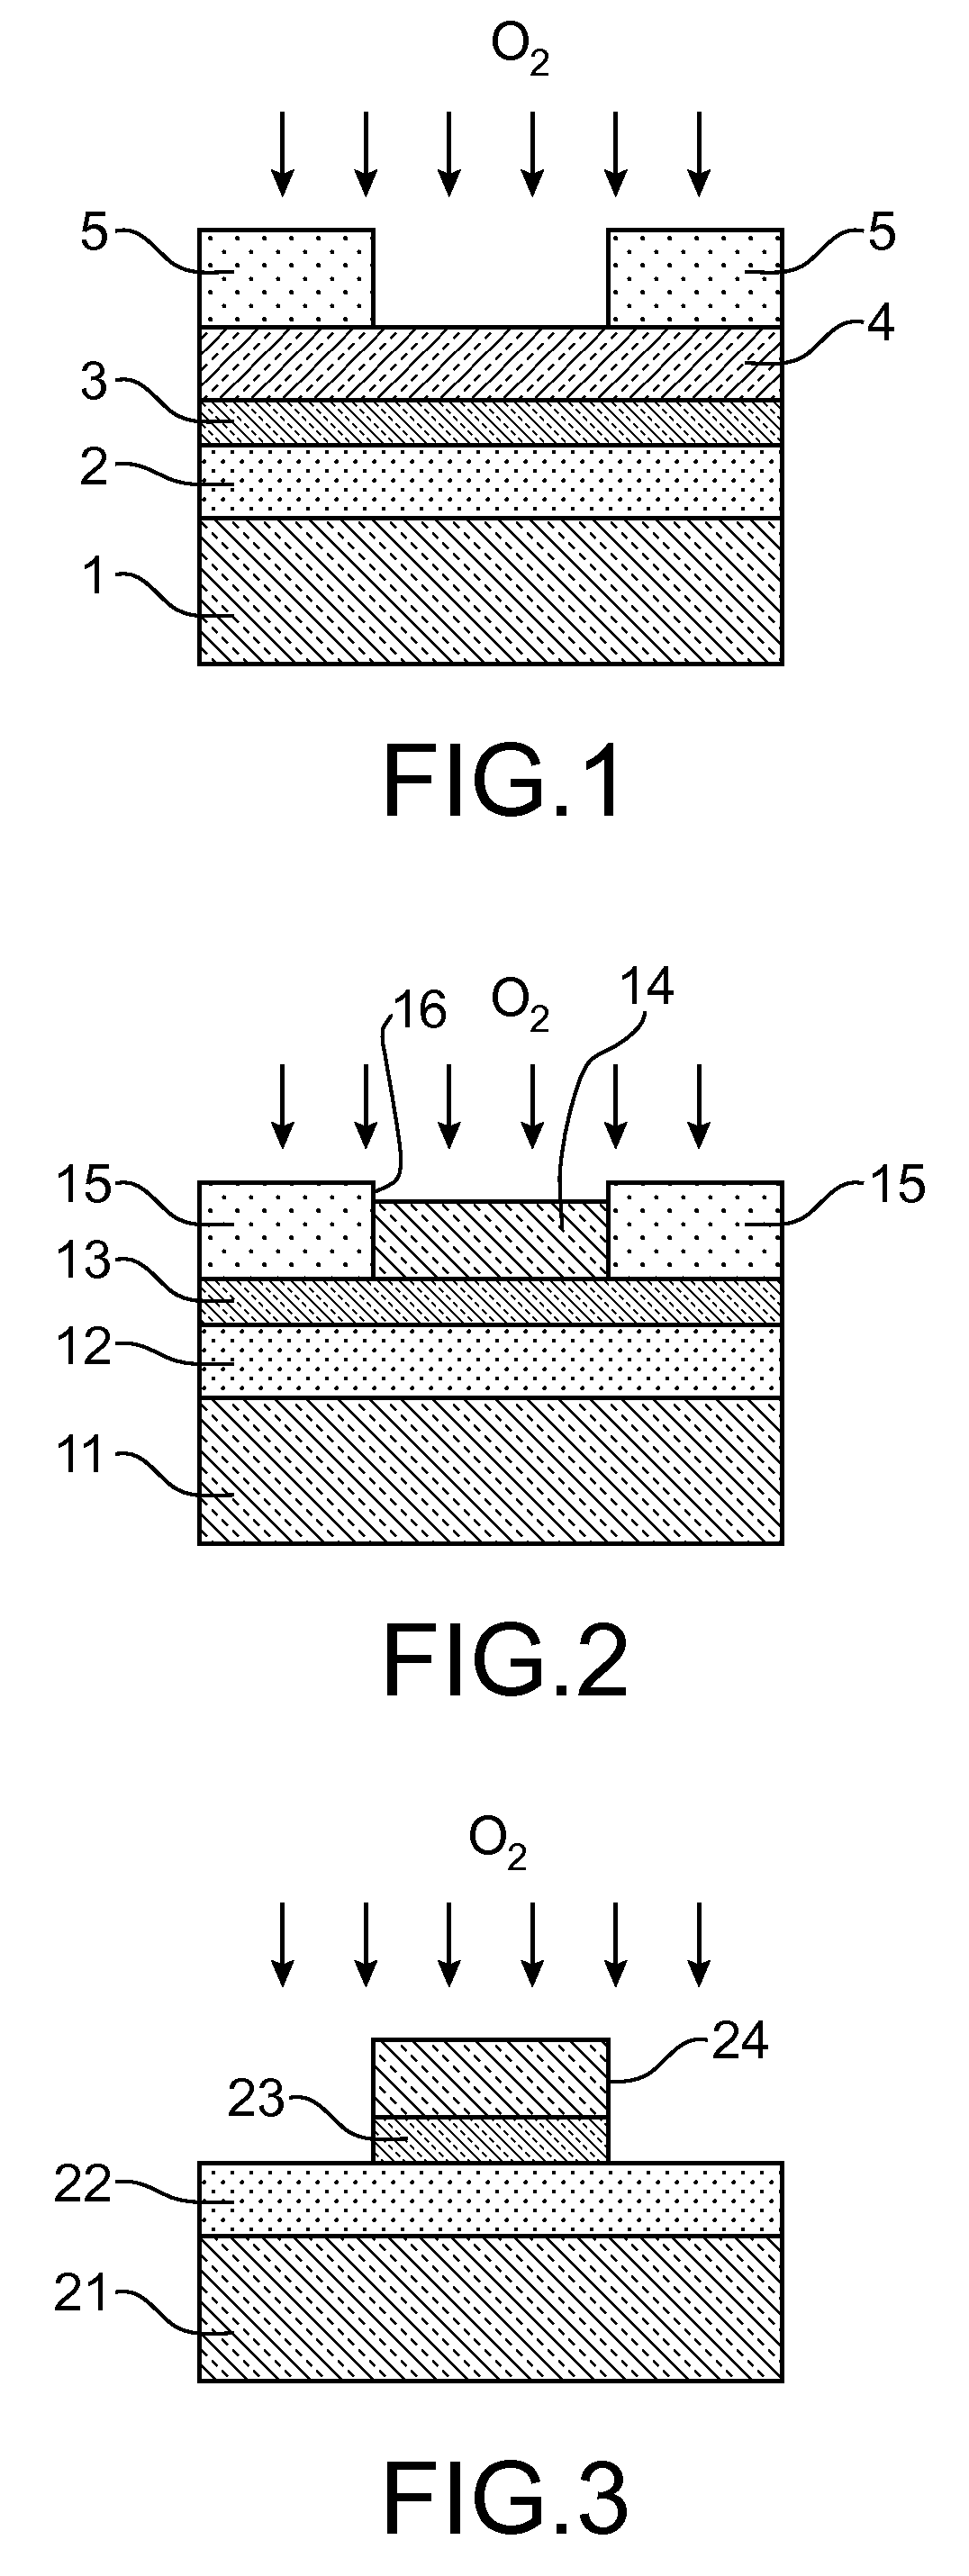 PROCESS FOR PRODUCING LOCALISED Ge0I STRUCTURES, OBTAINED BY GERMANIUM CONDENSATION